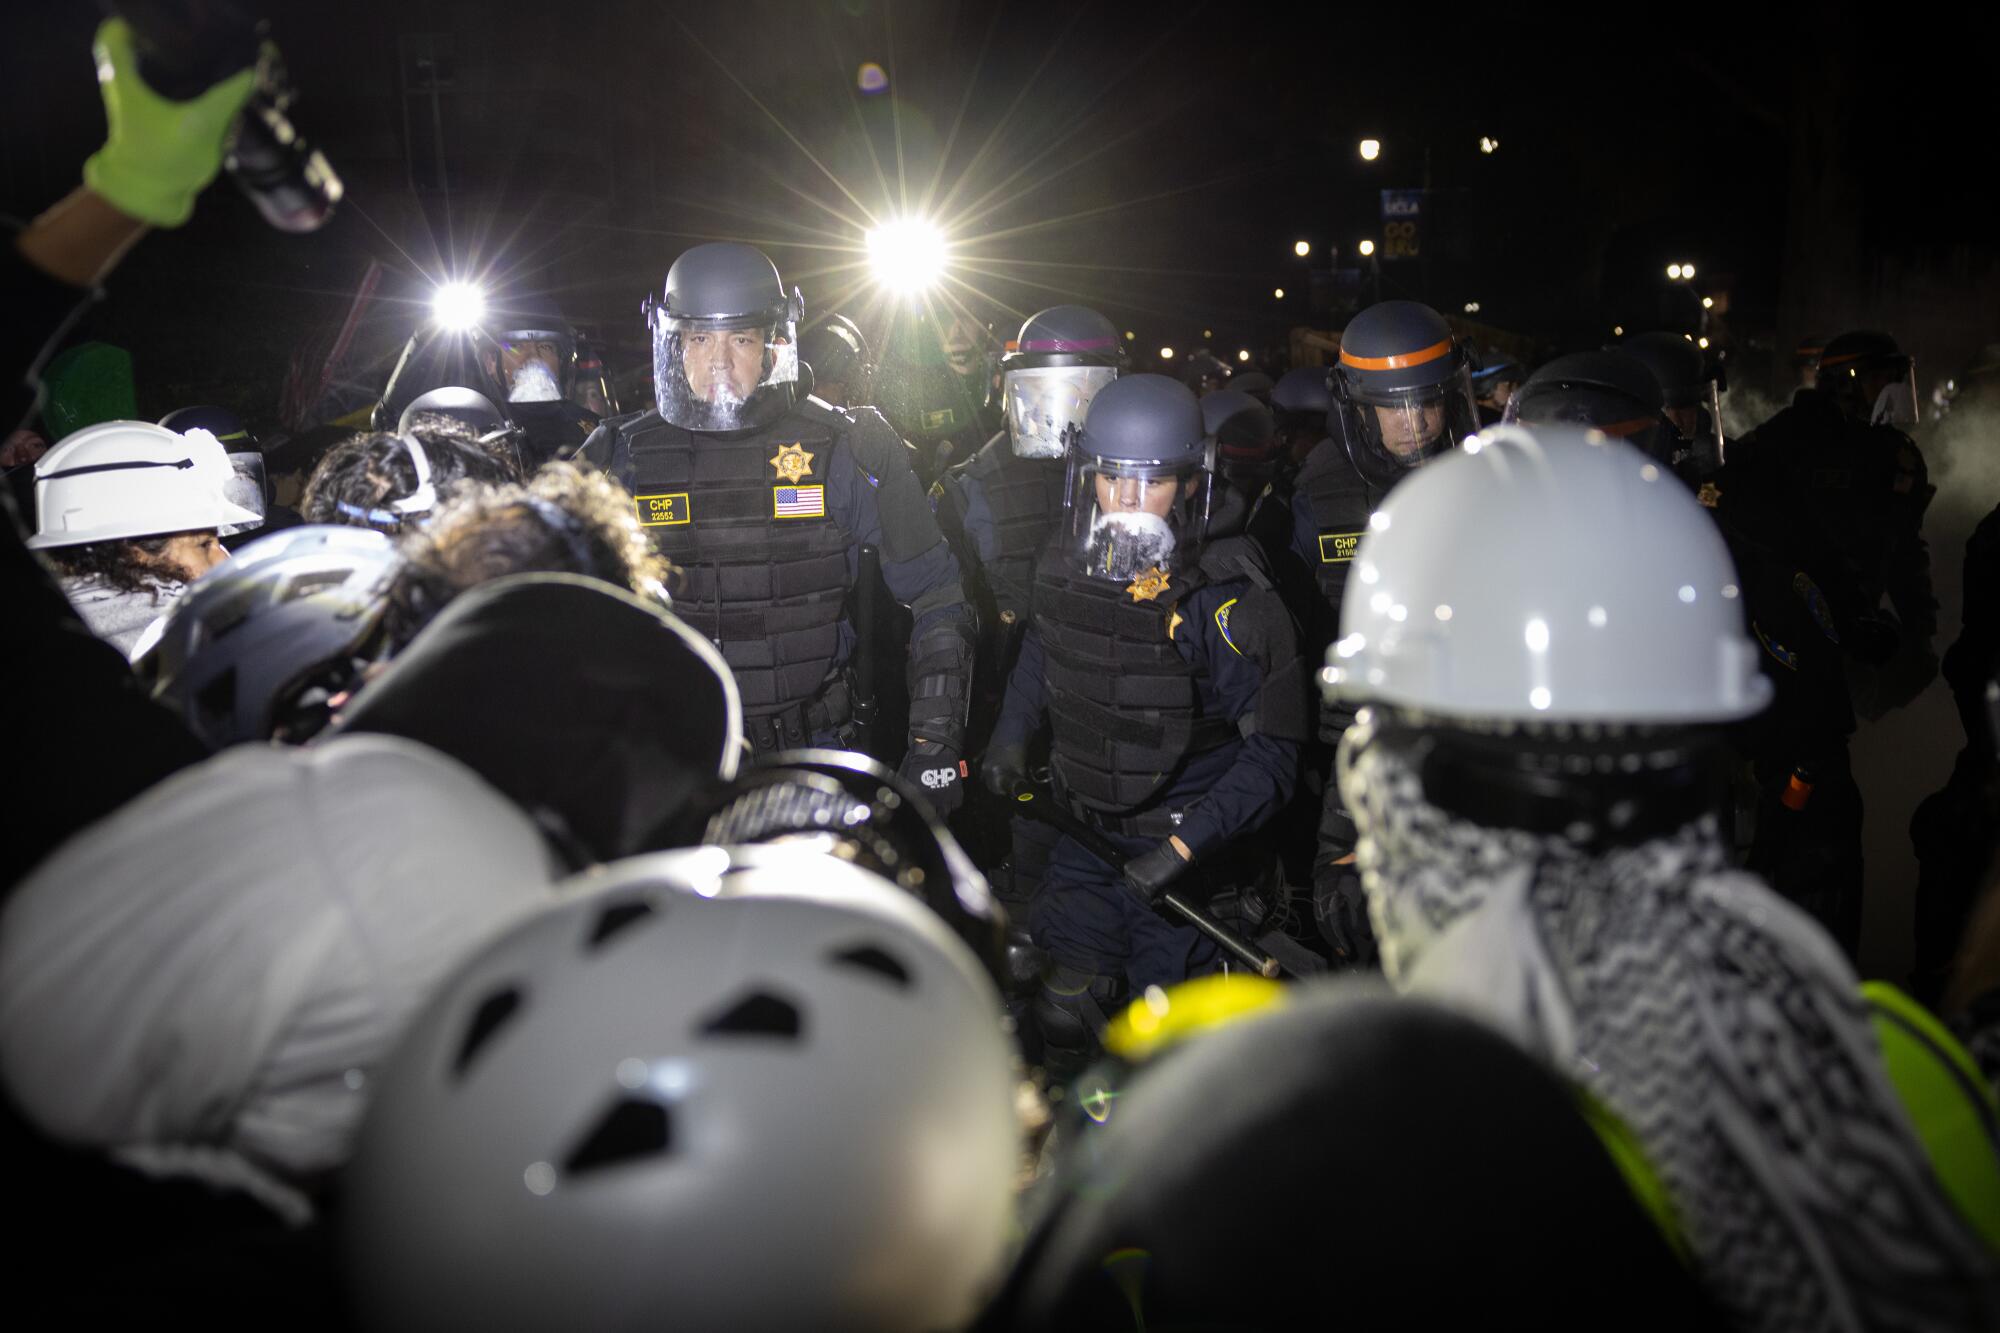 Police face people in white hard hats at night.